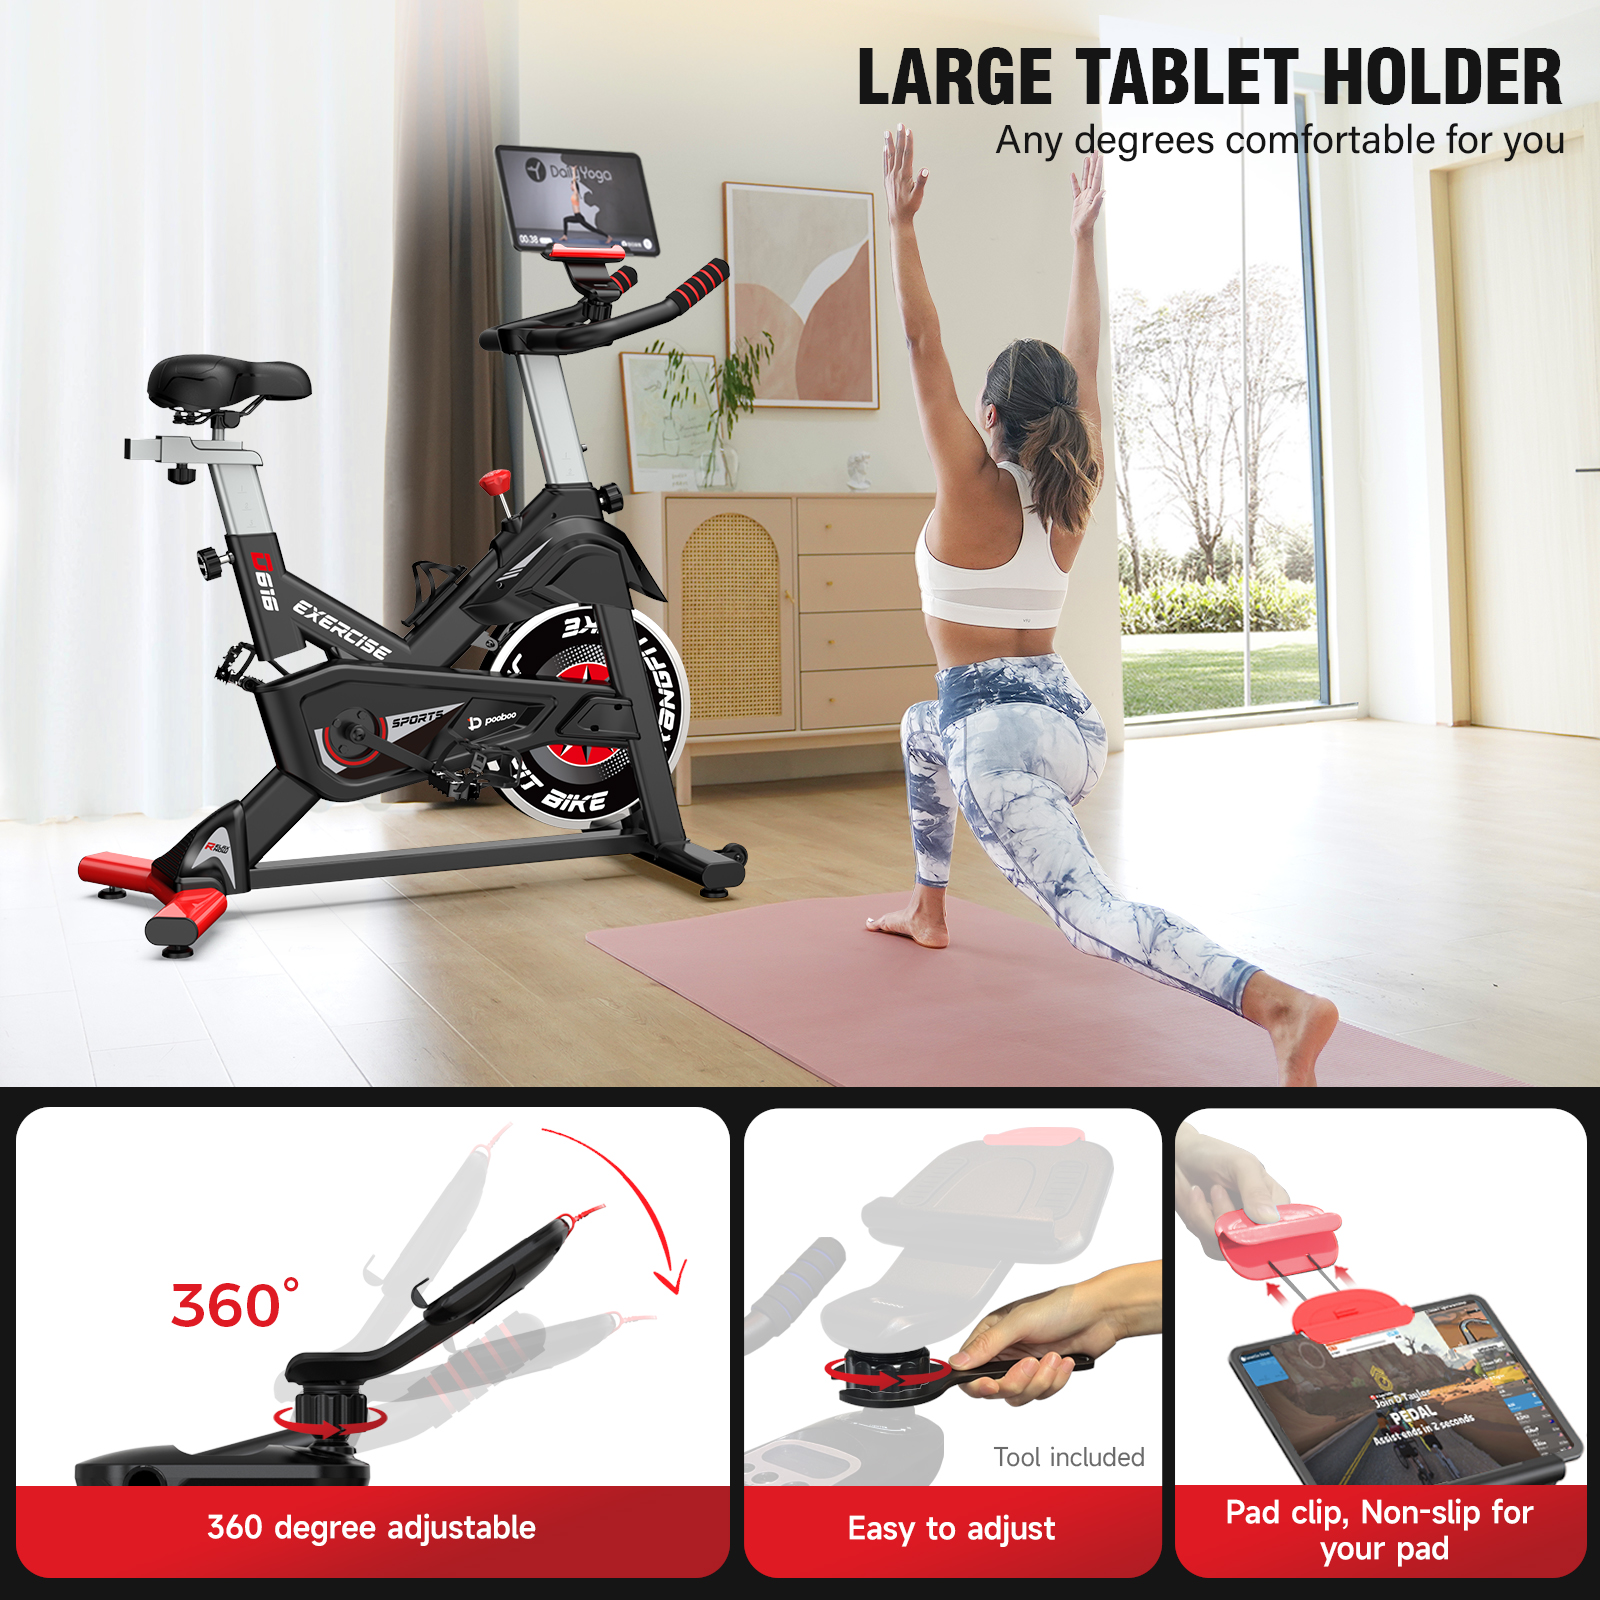 POOBOO Indoor Cycling Bike Exercise Bike Bluetooth Stationary Bike Heavy-duty Flywheel with Silent Magnetic Resistance 100 Levels for Home Gym Exercise - image 5 of 10